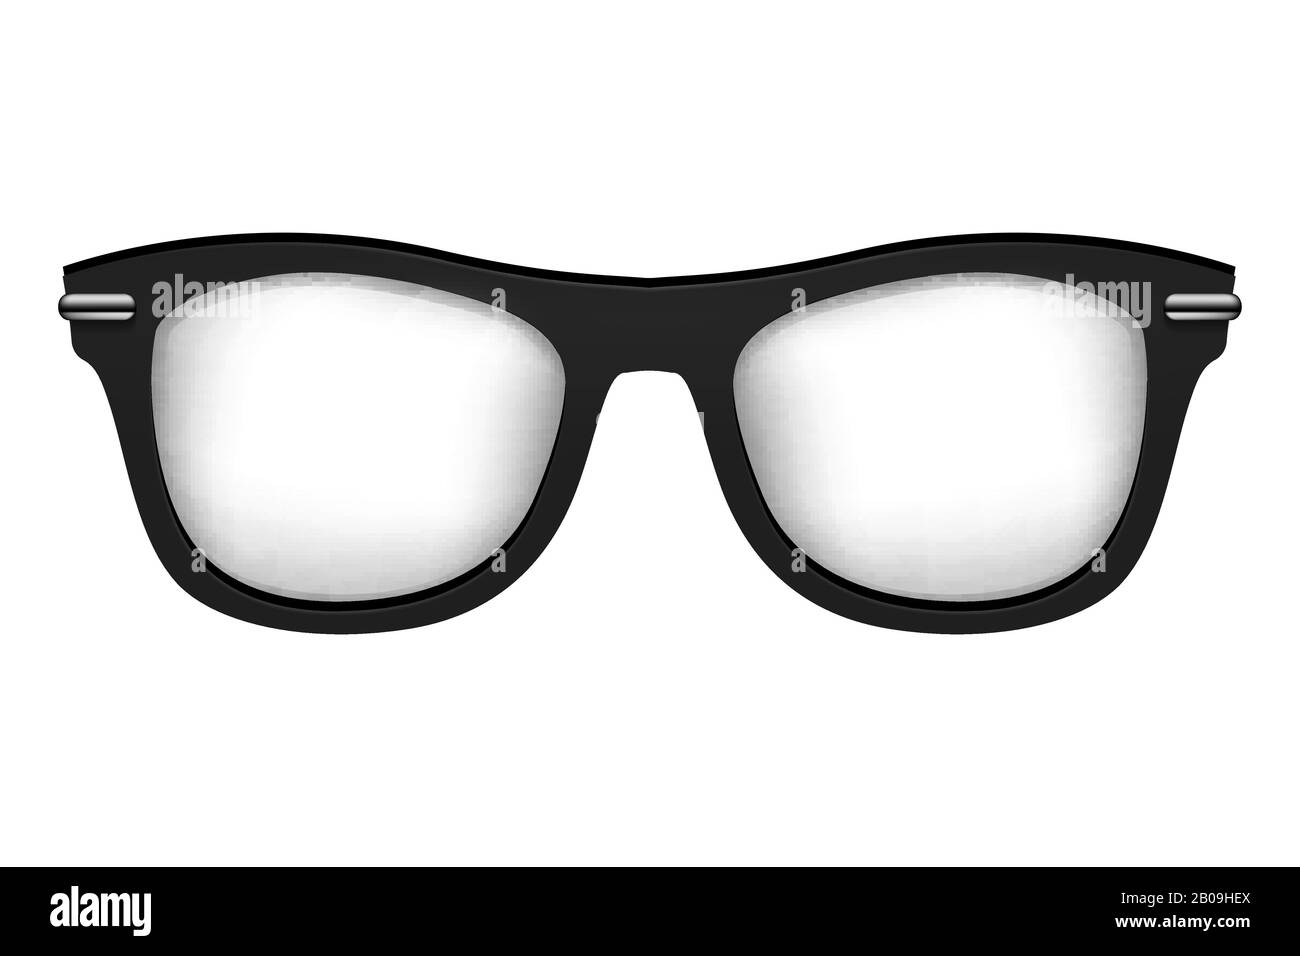 Realistic vector glasses in black white. Fashion glasses isolated ...